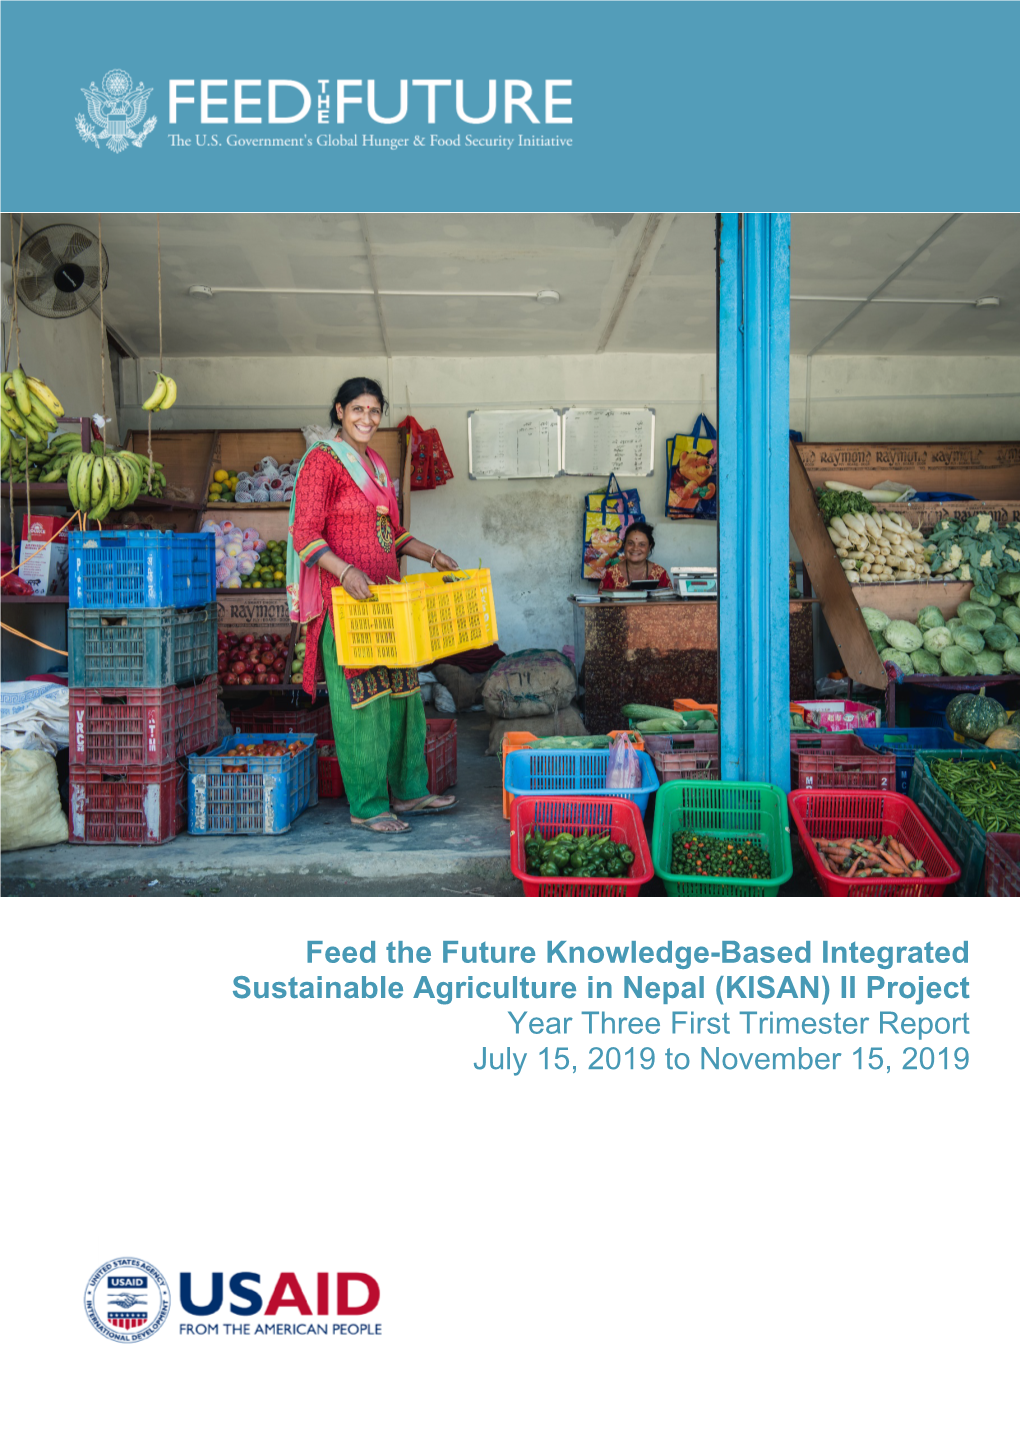 Feed the Future Knowledge-Based Integrated Sustainable Agriculture in Nepal (KISAN) II Project Year Three First Trimester Report July 15, 2019 to November 15, 2019